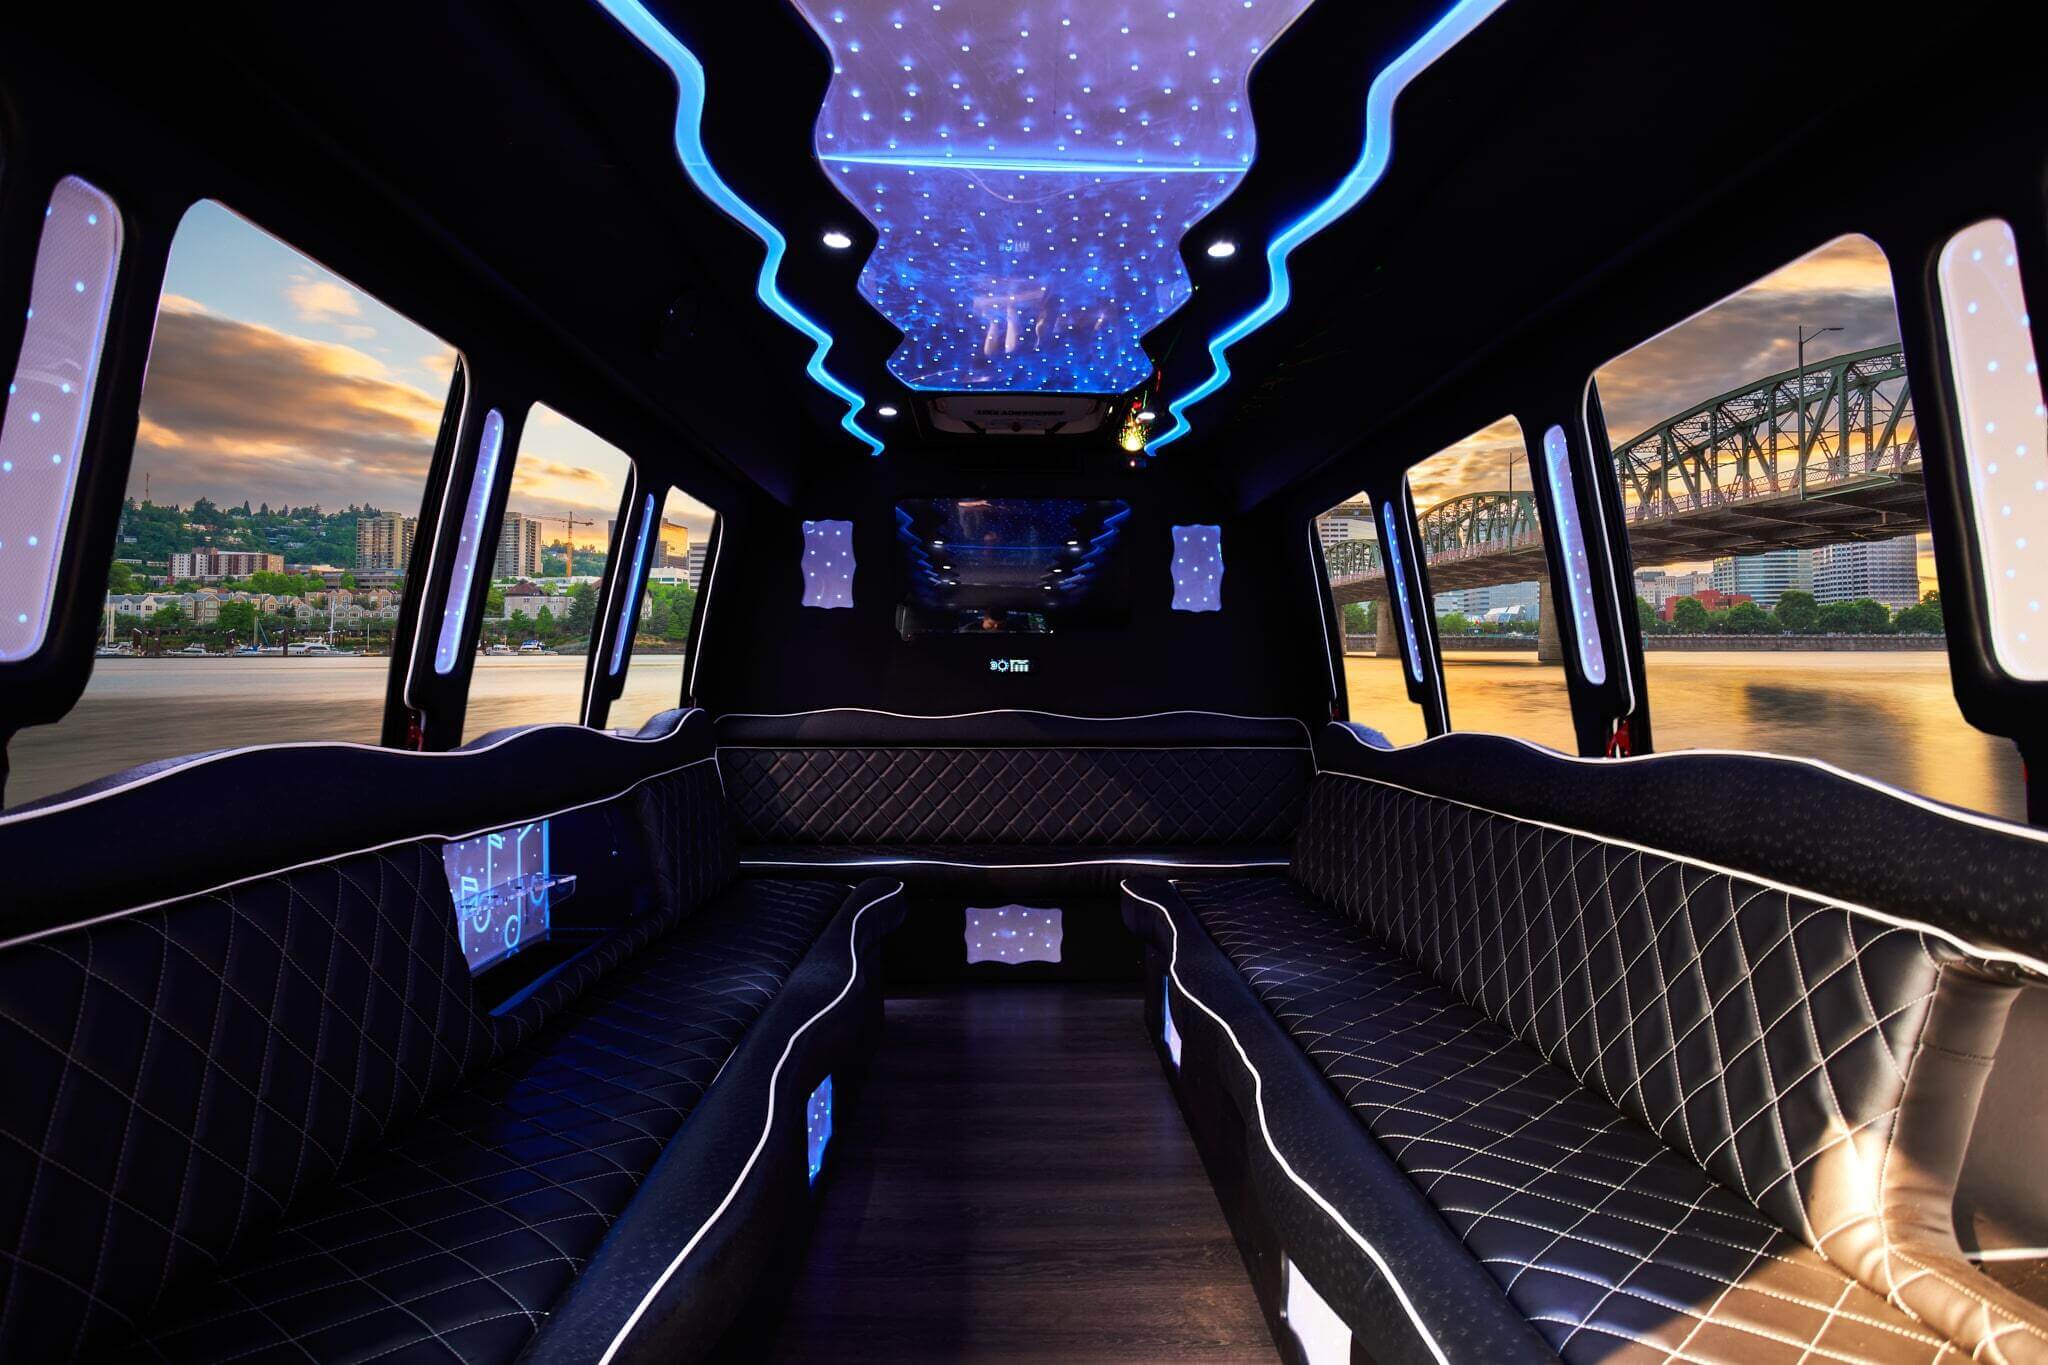 Wine and Brewery Tours Prom Limo Rentals